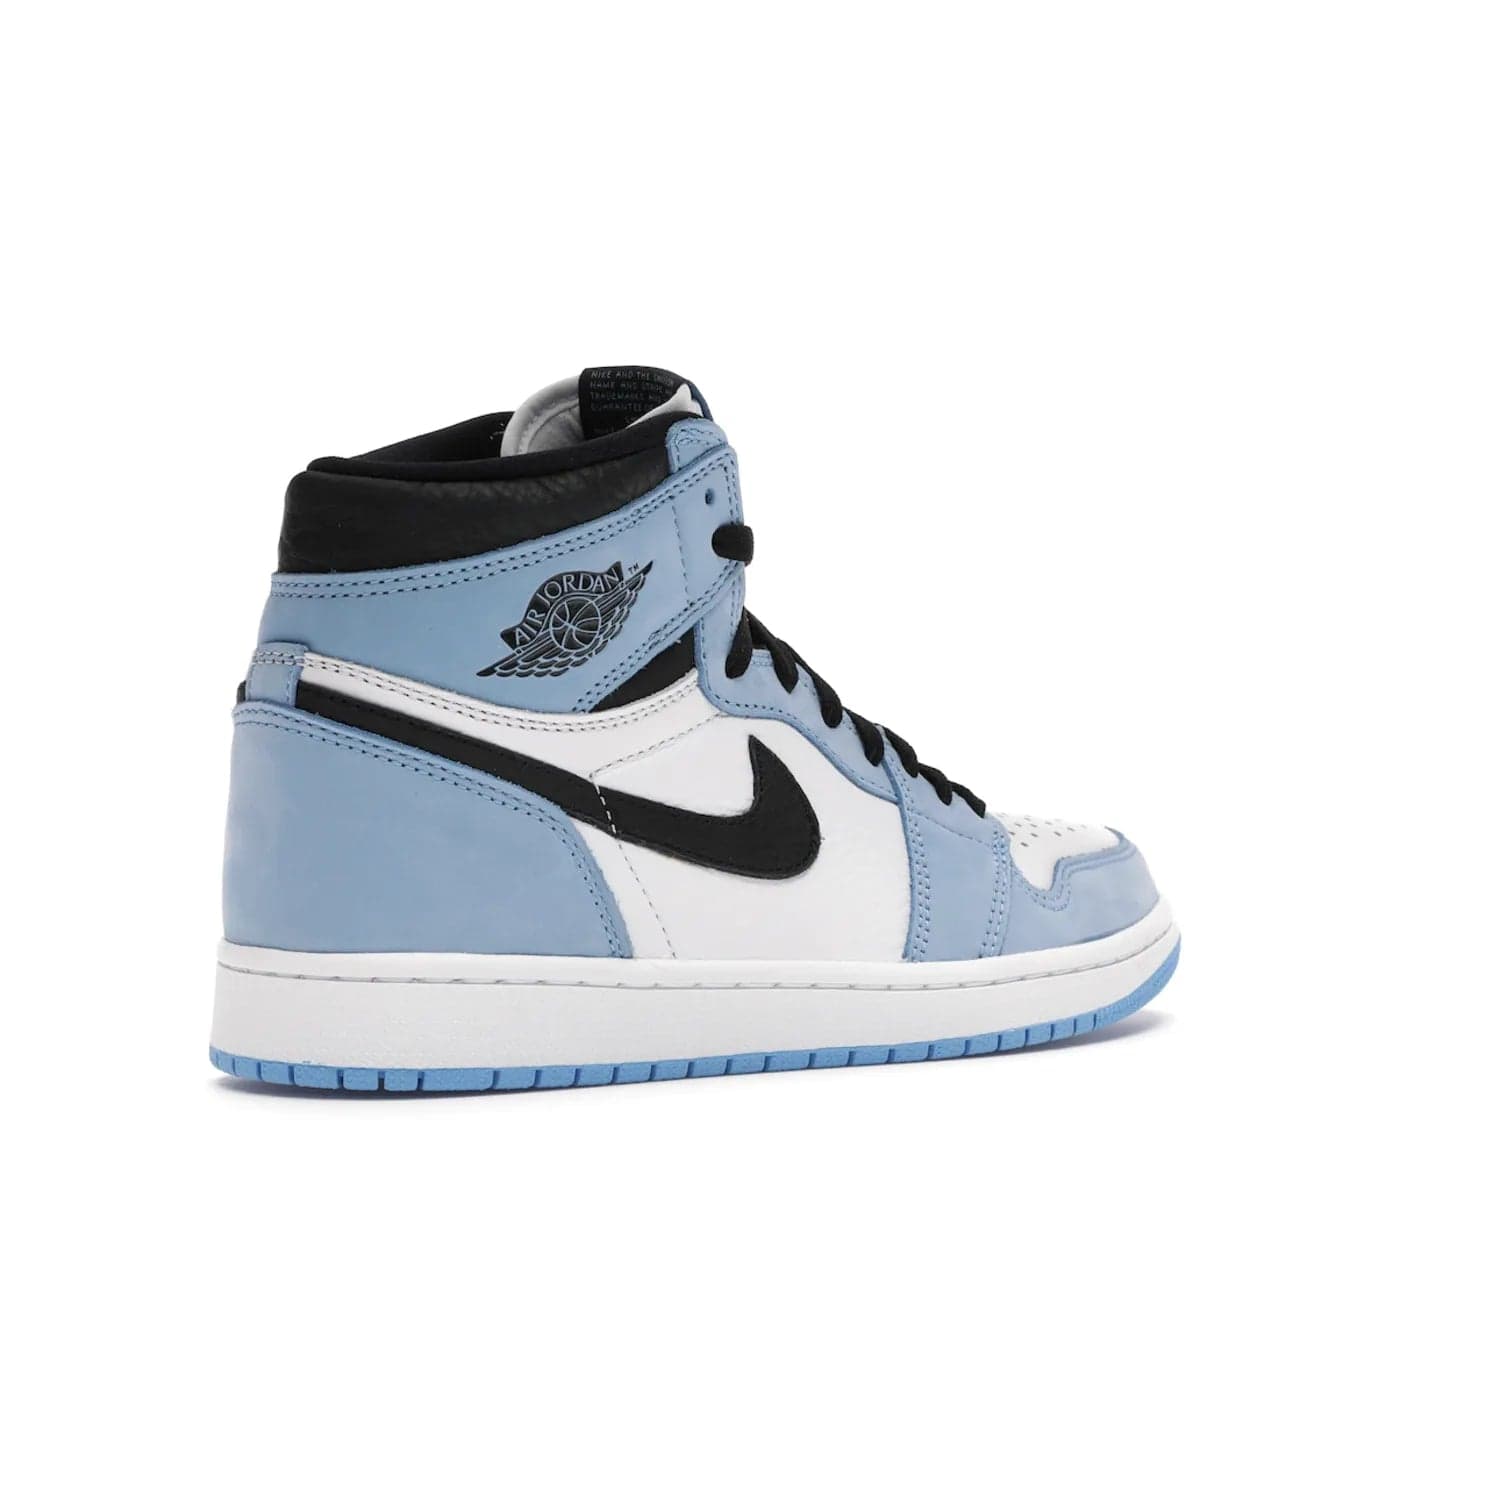 Jordan 1 Retro High White University Blue Black - Image 33 - Only at www.BallersClubKickz.com - Shop the Air Jordan 1 Retro High University Blue. White and black tumbled leather upper with University Blue Durabuck overlays, Nike Air woven label, Air Jordan Wings Logo, white midsole and University Blue outsole. Available March 2021.